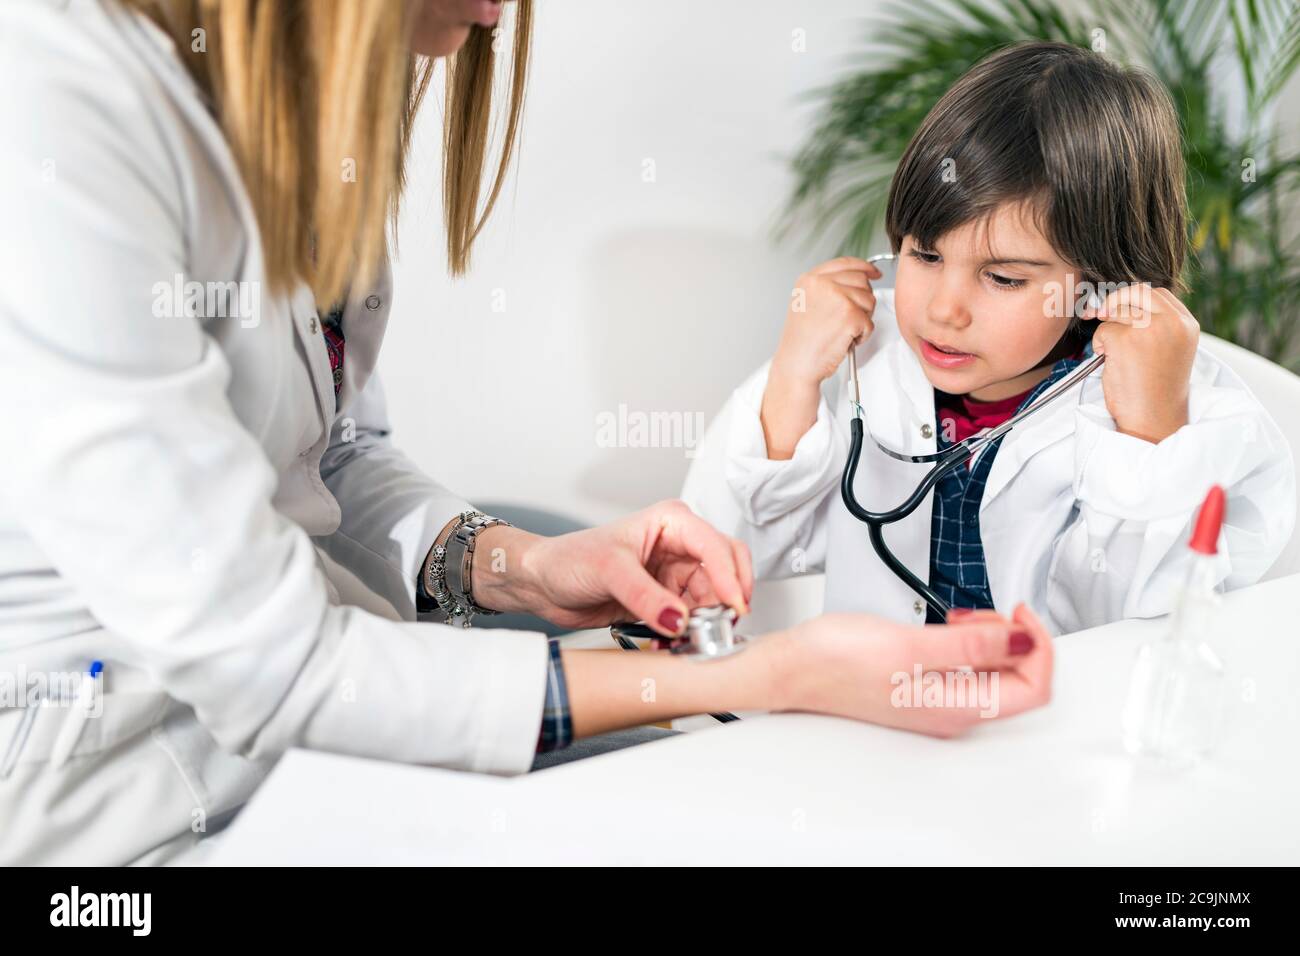 Little boy playing at being a doctor in a paediatrician's office. Stock Photo